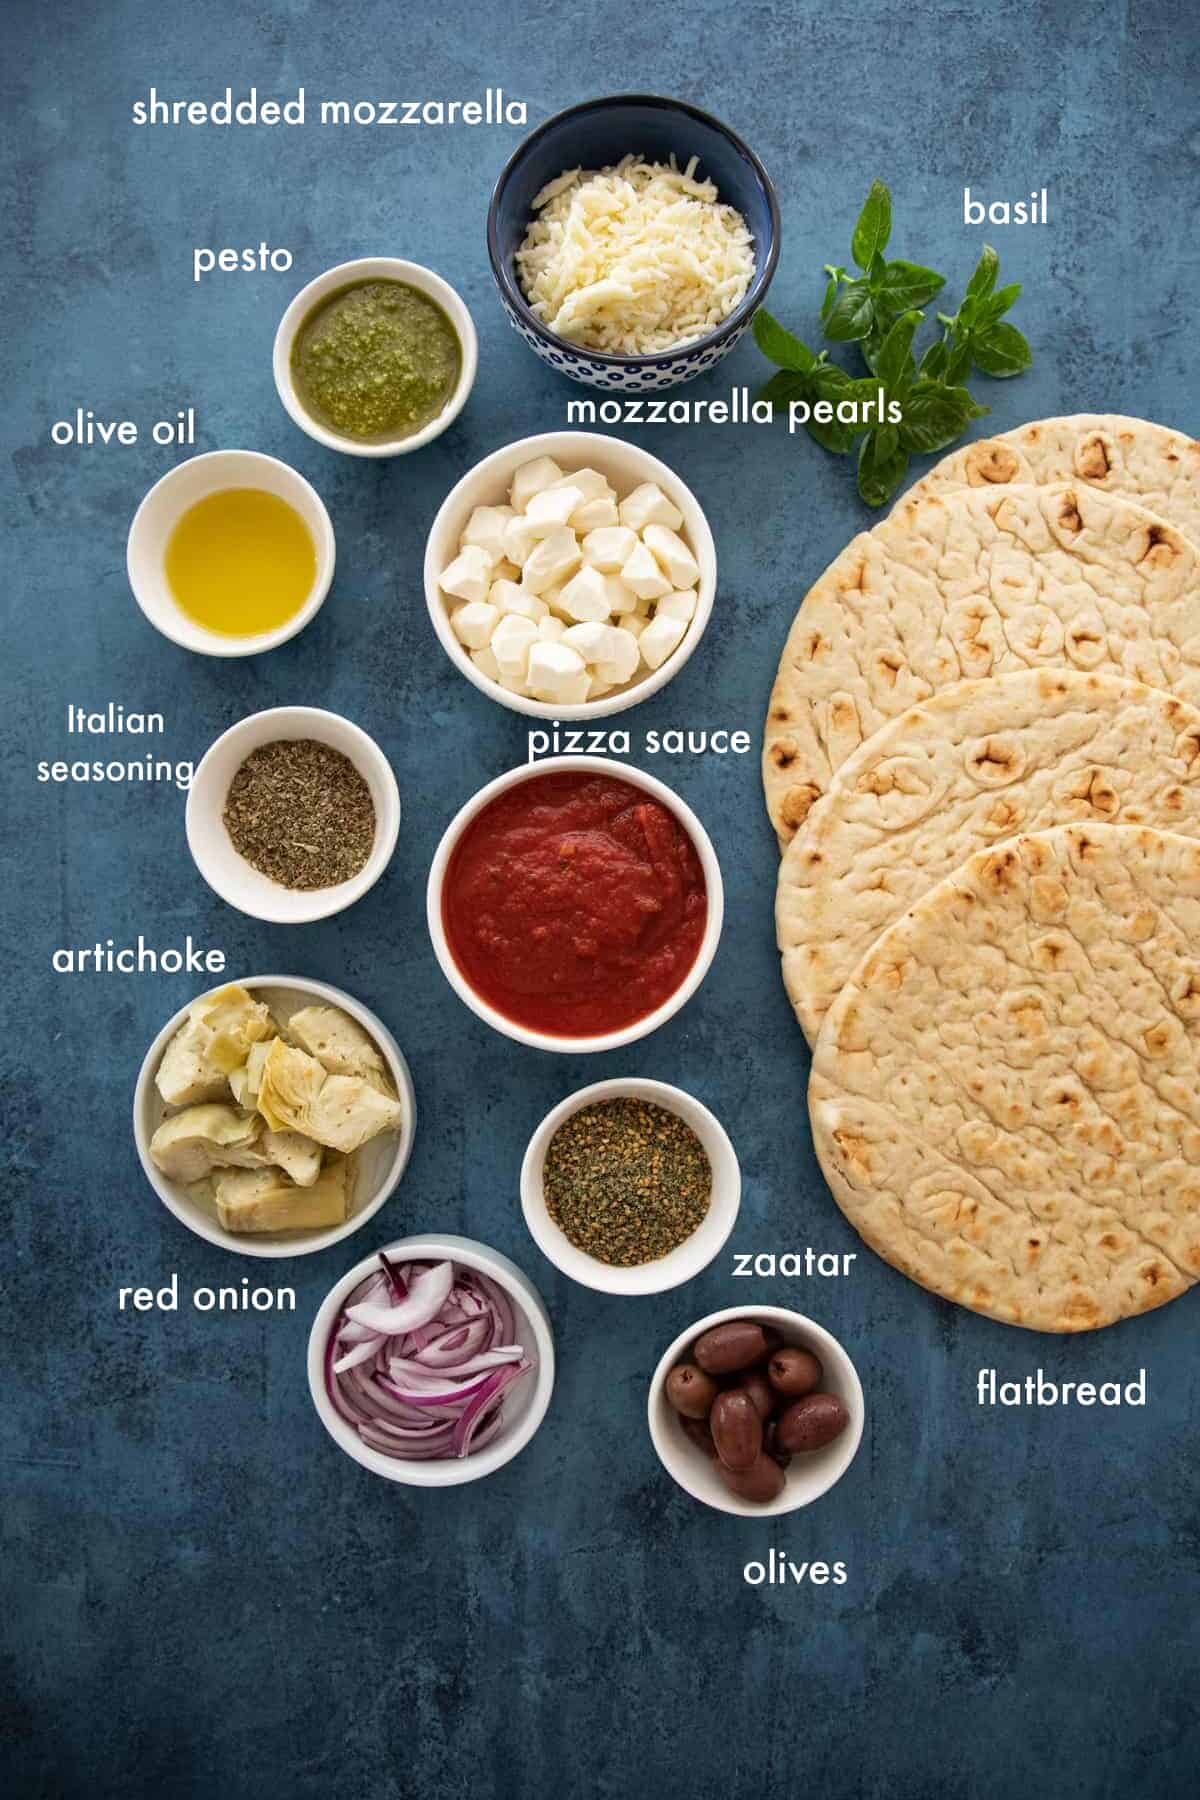 Flatbread pizza toppings including pizza sauce, cheese, vegetables or pesto. 